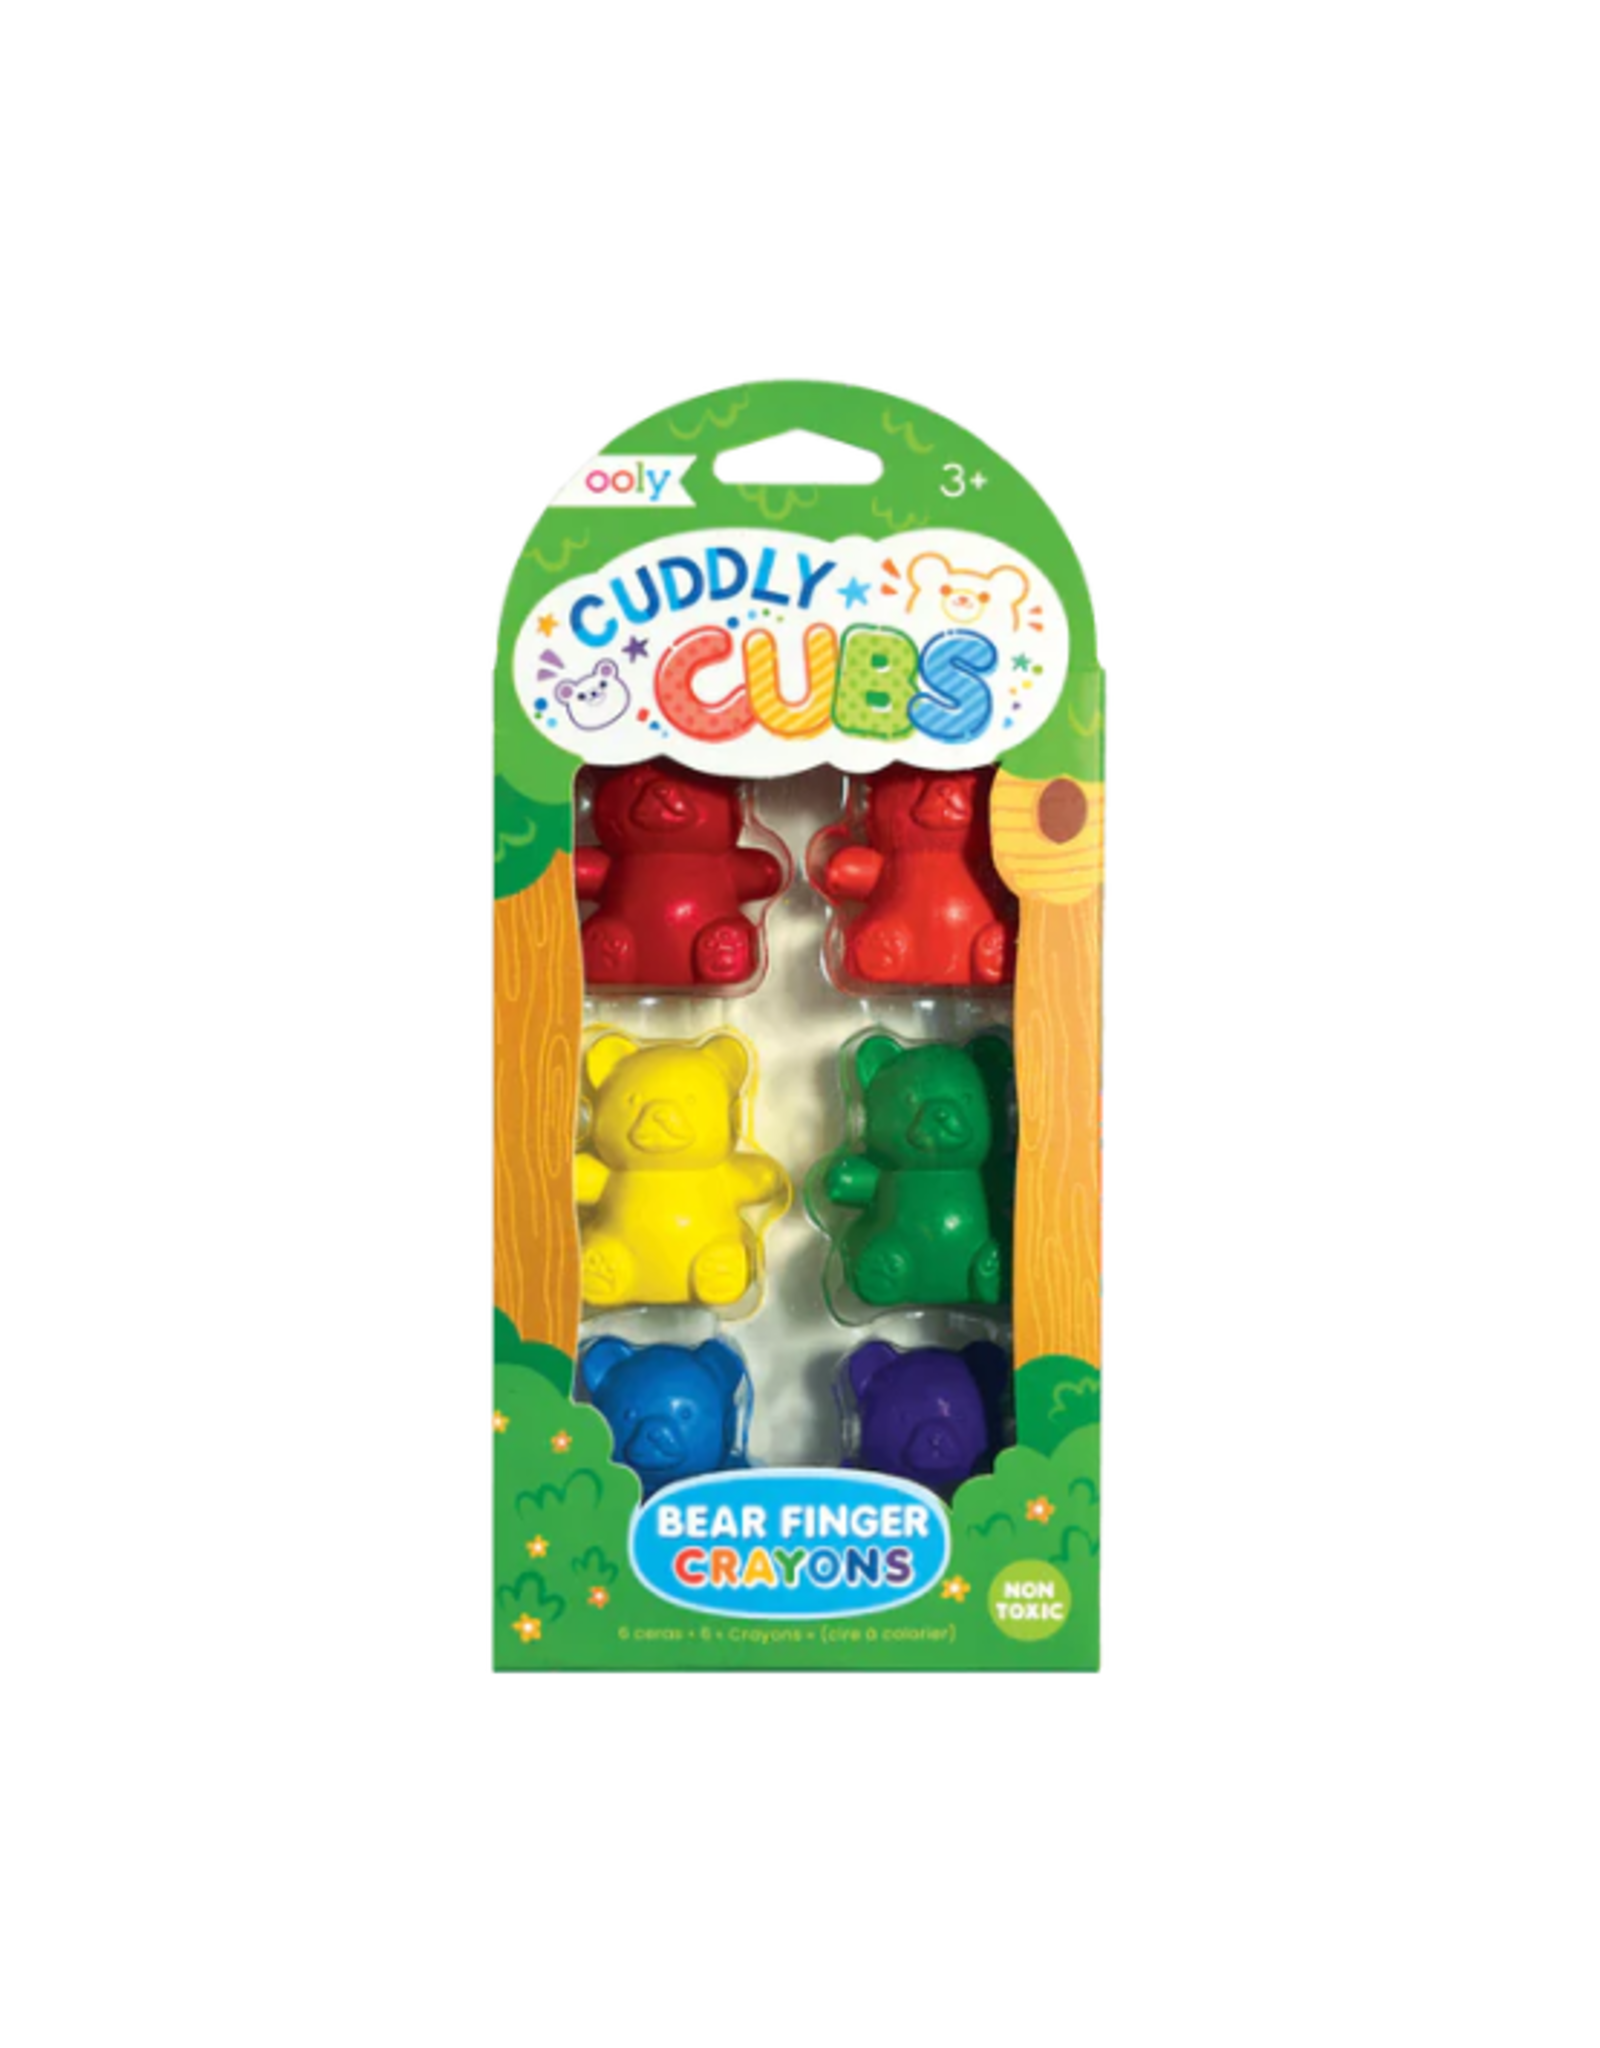 Ooly Ooly - Cuddly Cubs Bear Finger Crayons